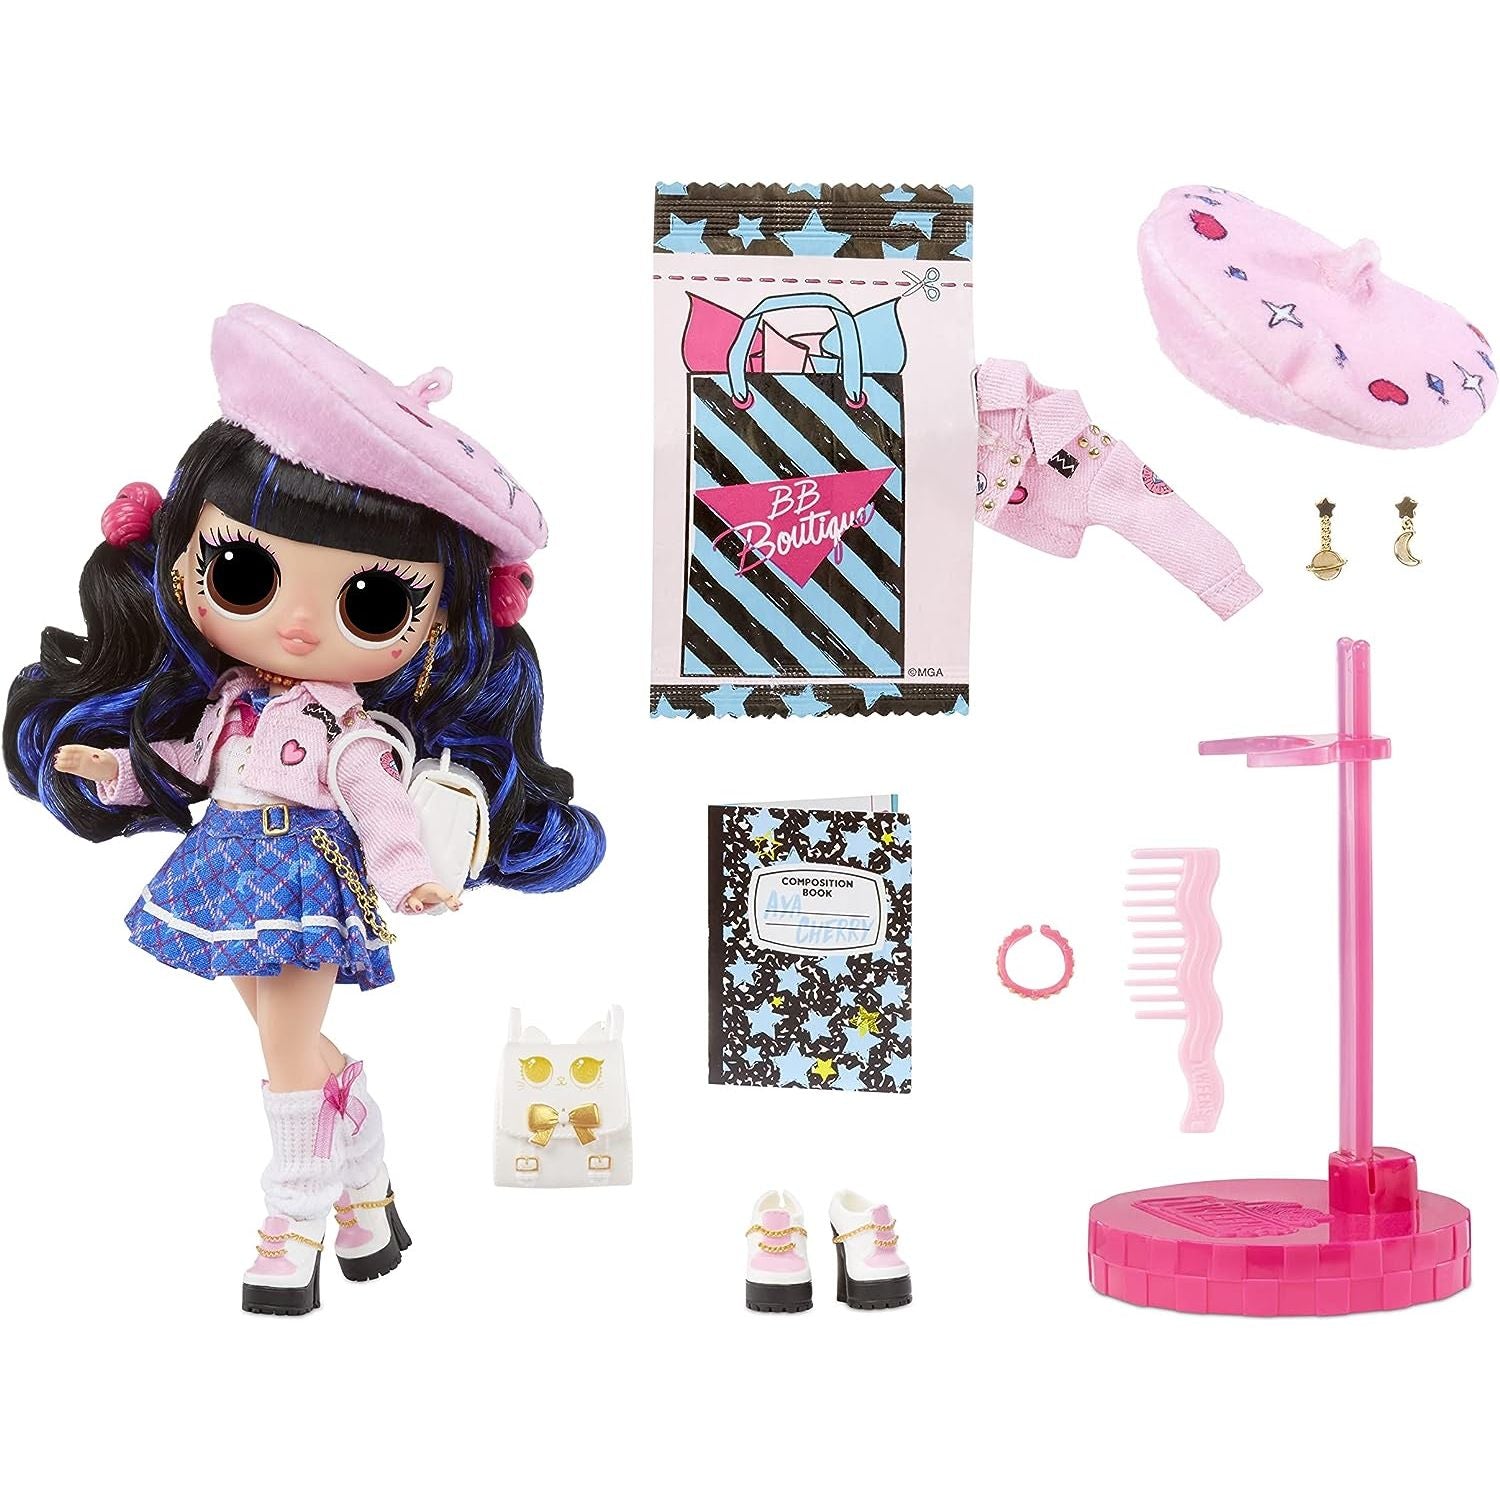 L.O.L. Surprise! Tweens Series 2 Fashion Doll Aya Cherry with 15 Surprises Including Pink Outfit and Accessories for Fashion Toy Girls